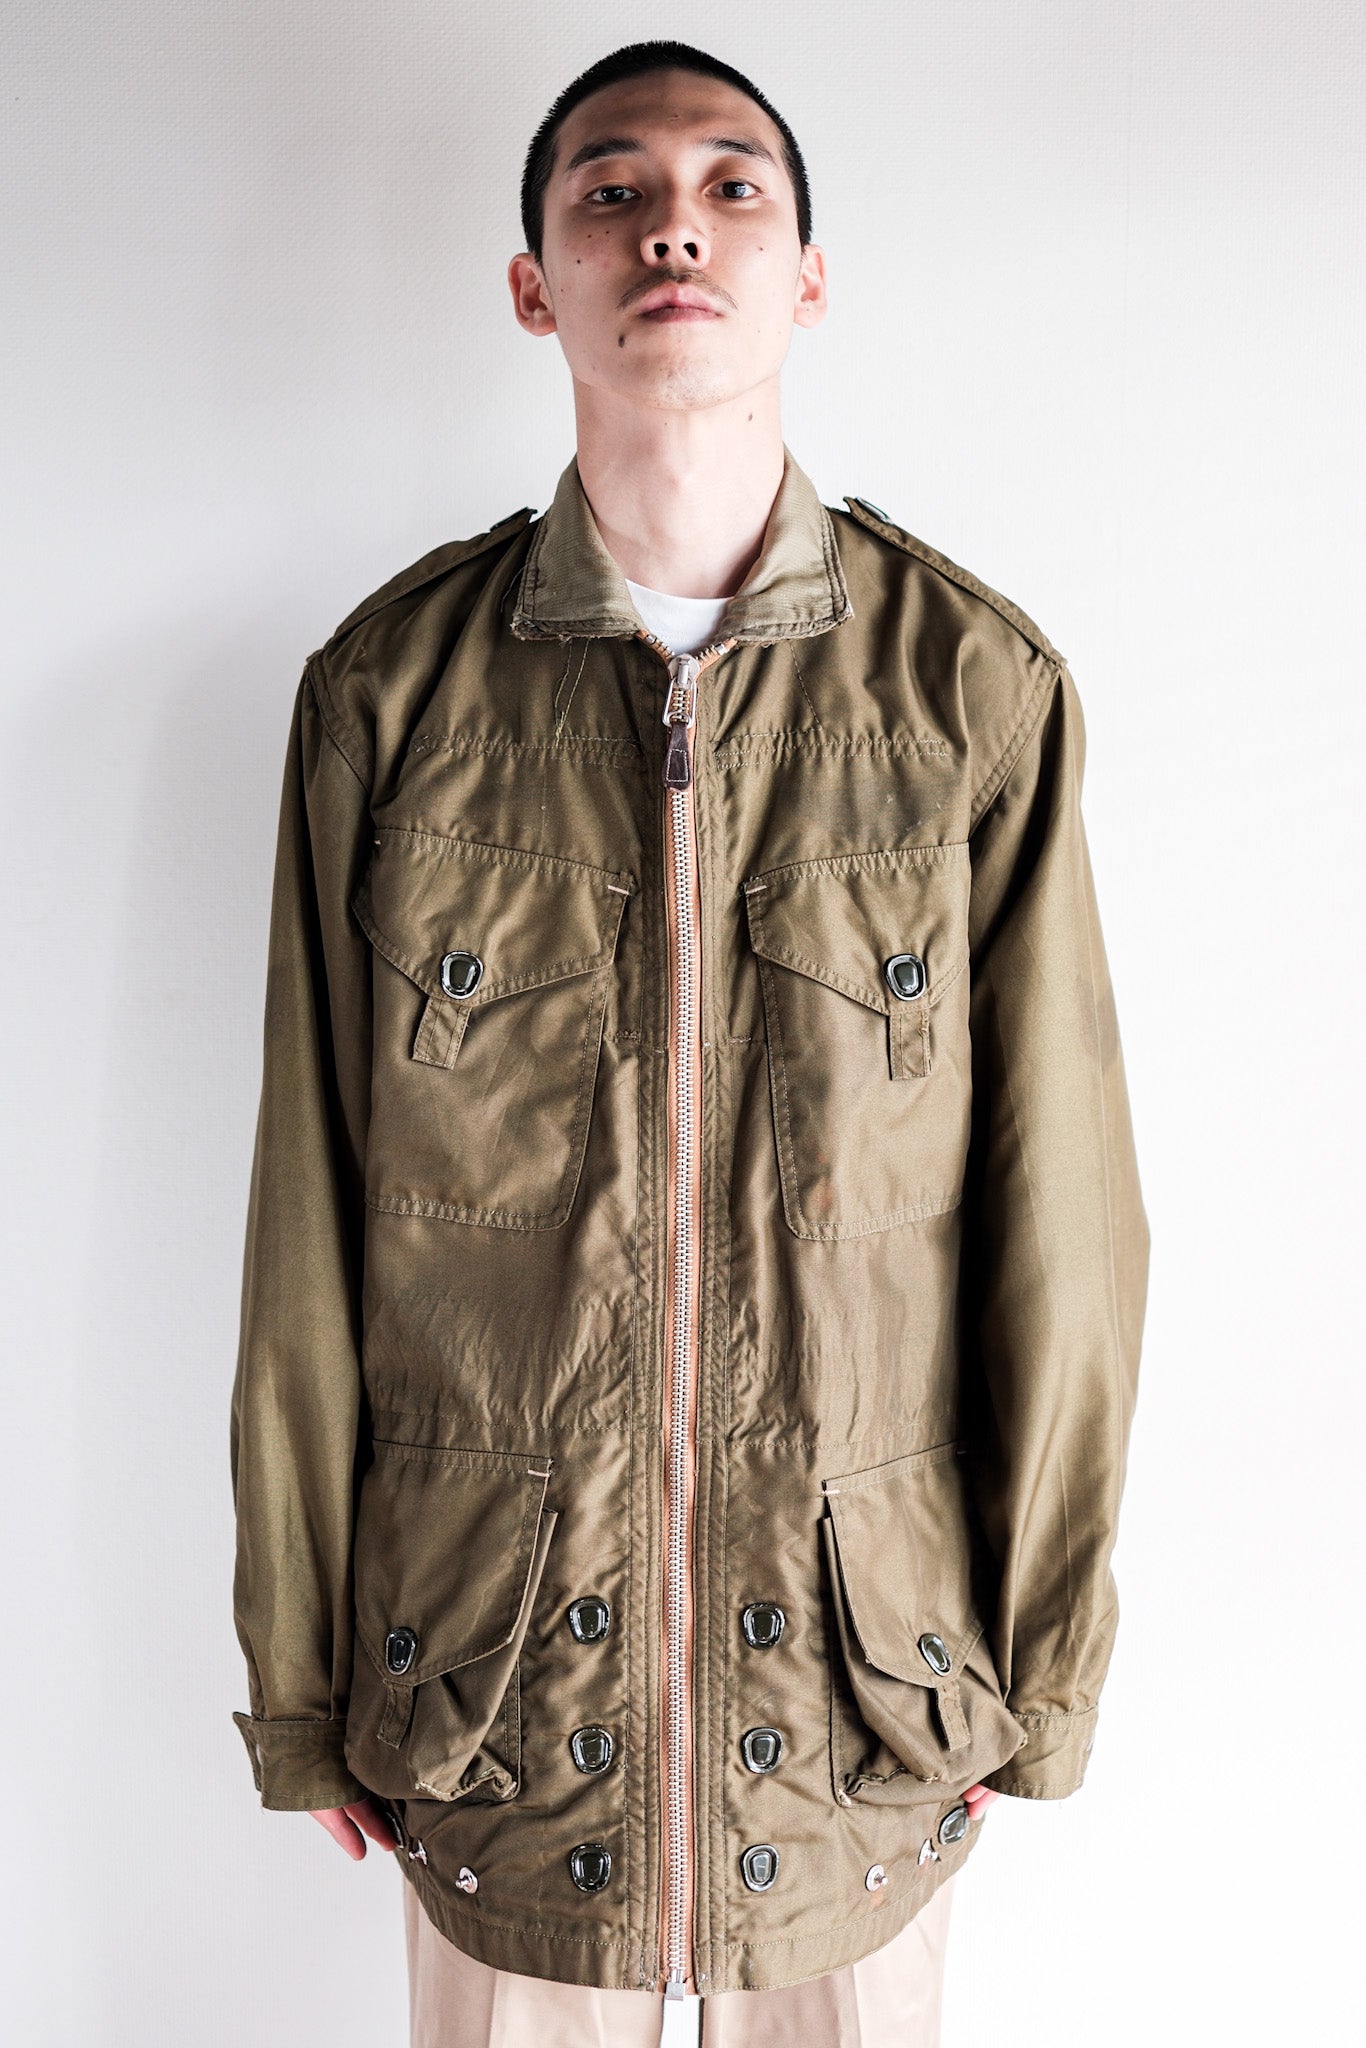 [~ 60's] Royal Canadian Air Force Paratrooper Jacket